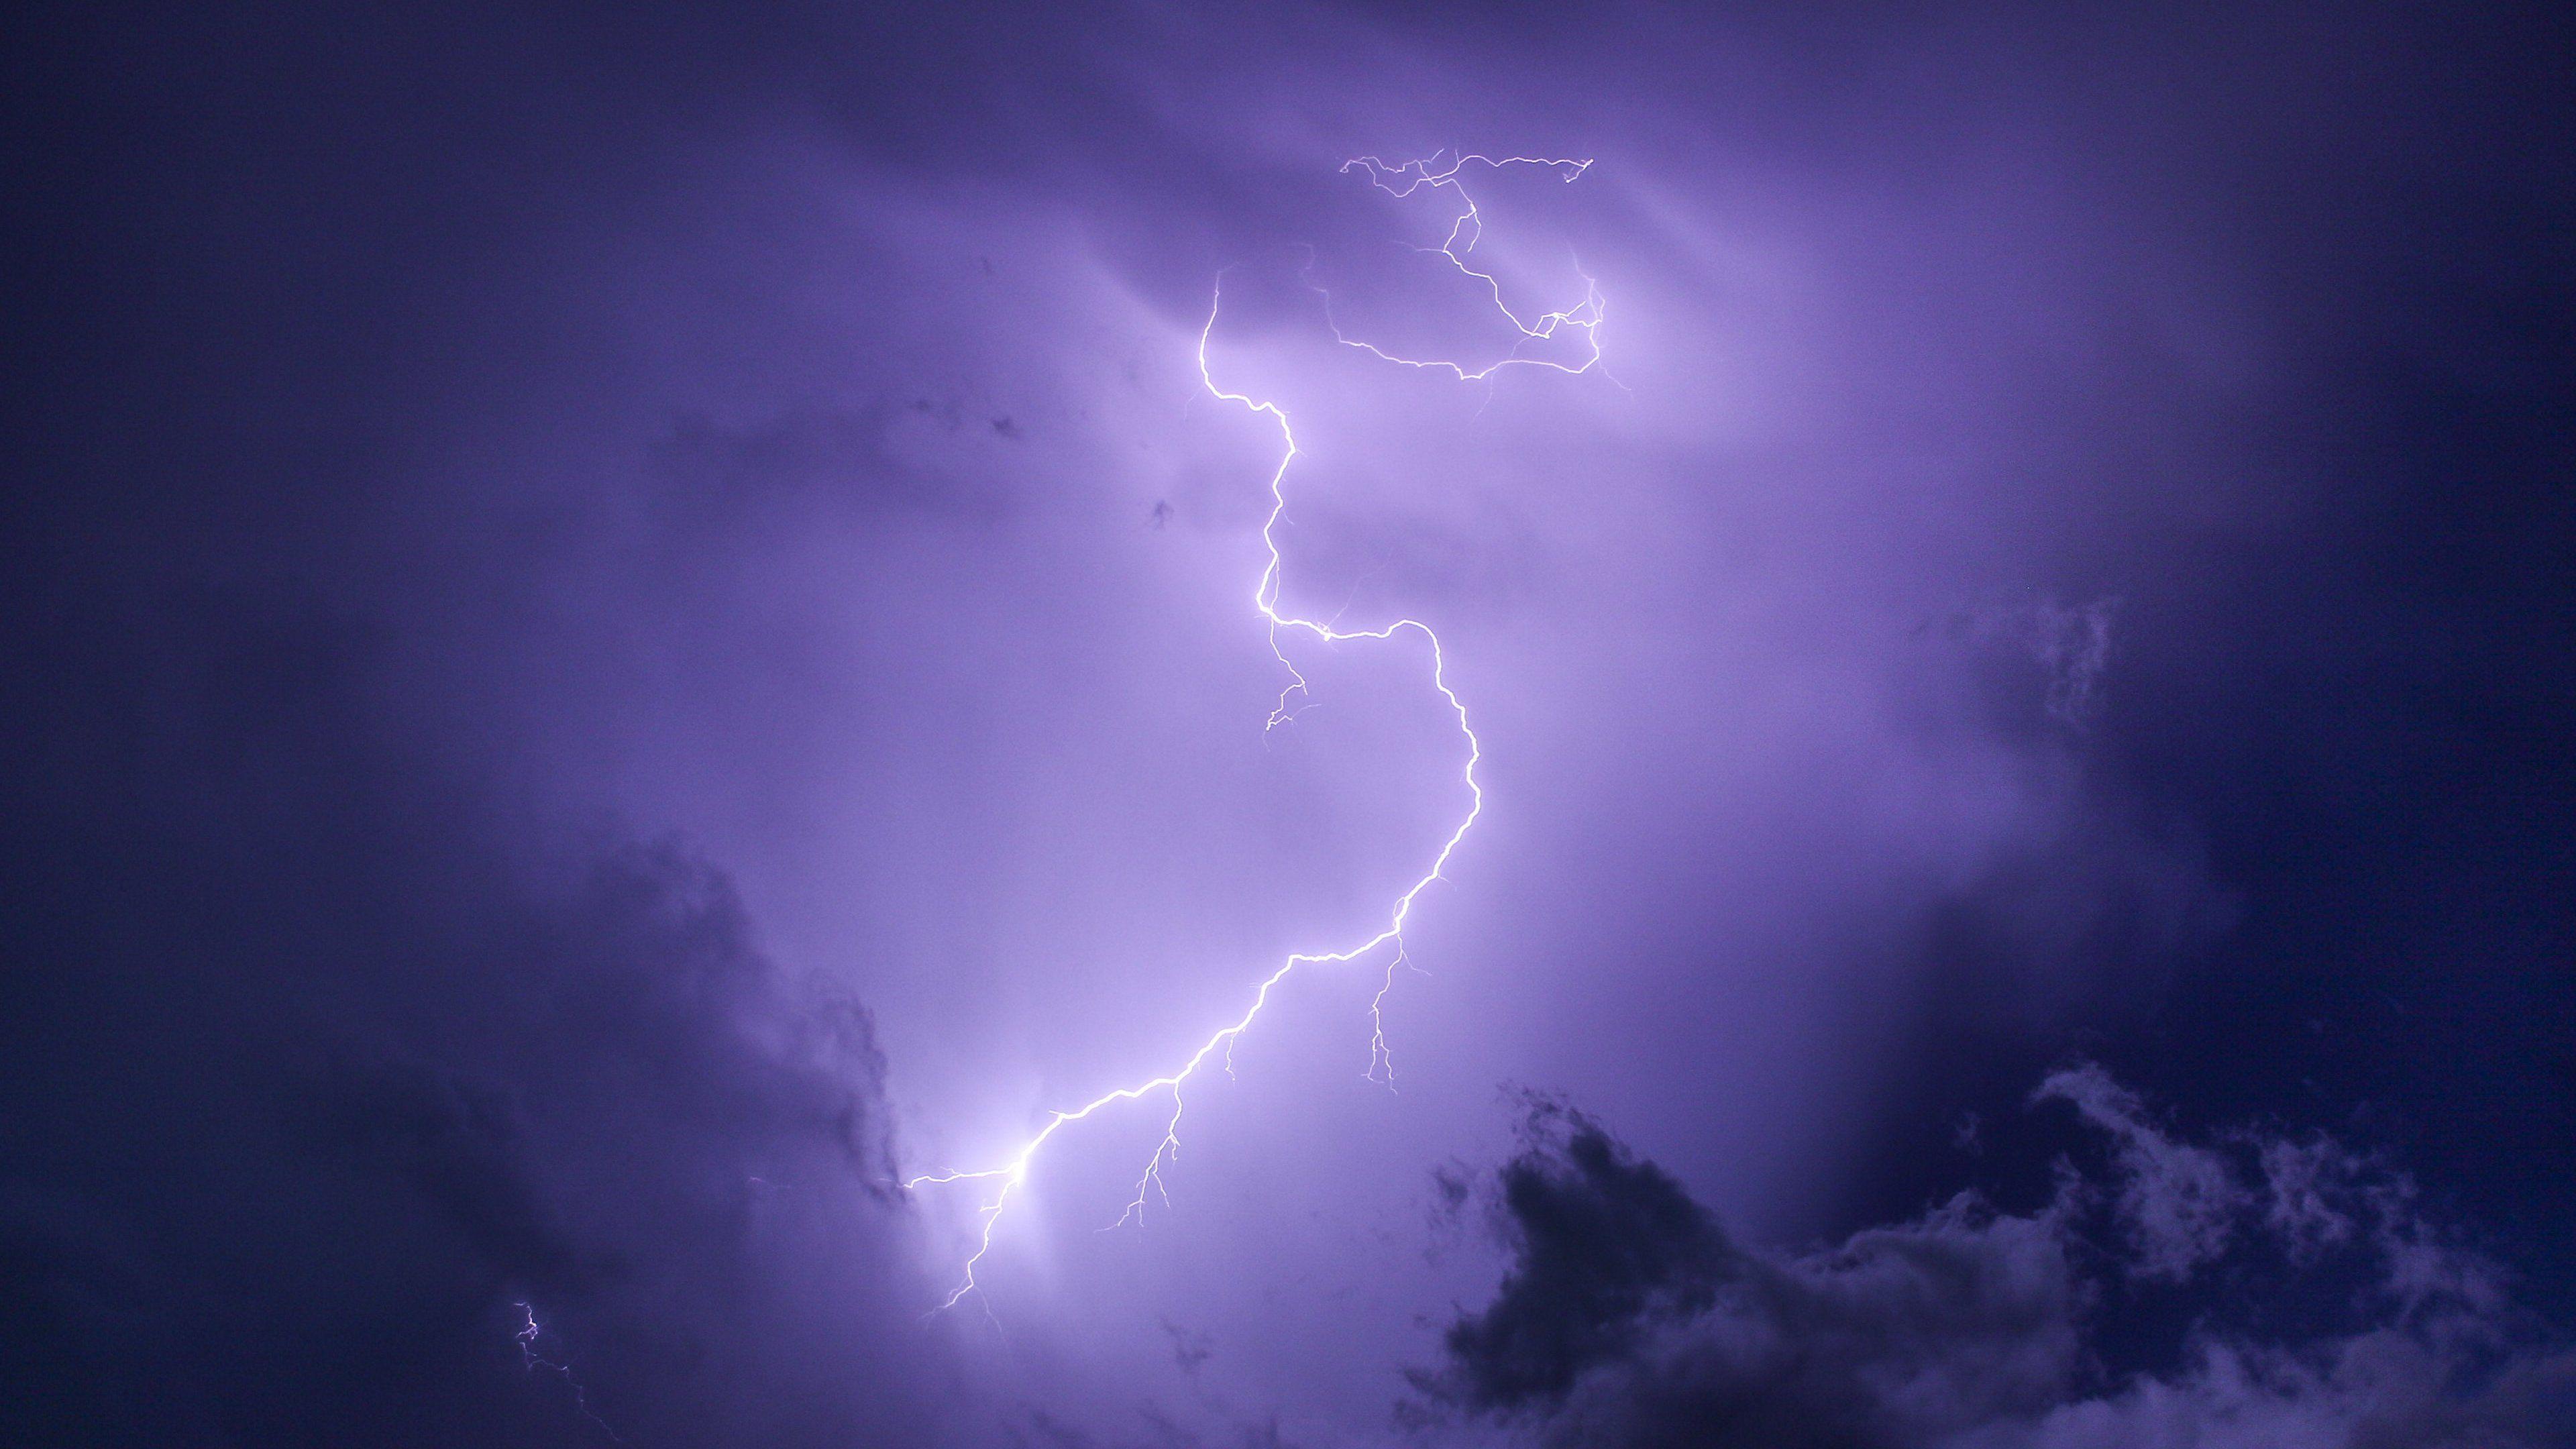 80 Lightning wallpapers phone  Download Free backgrounds